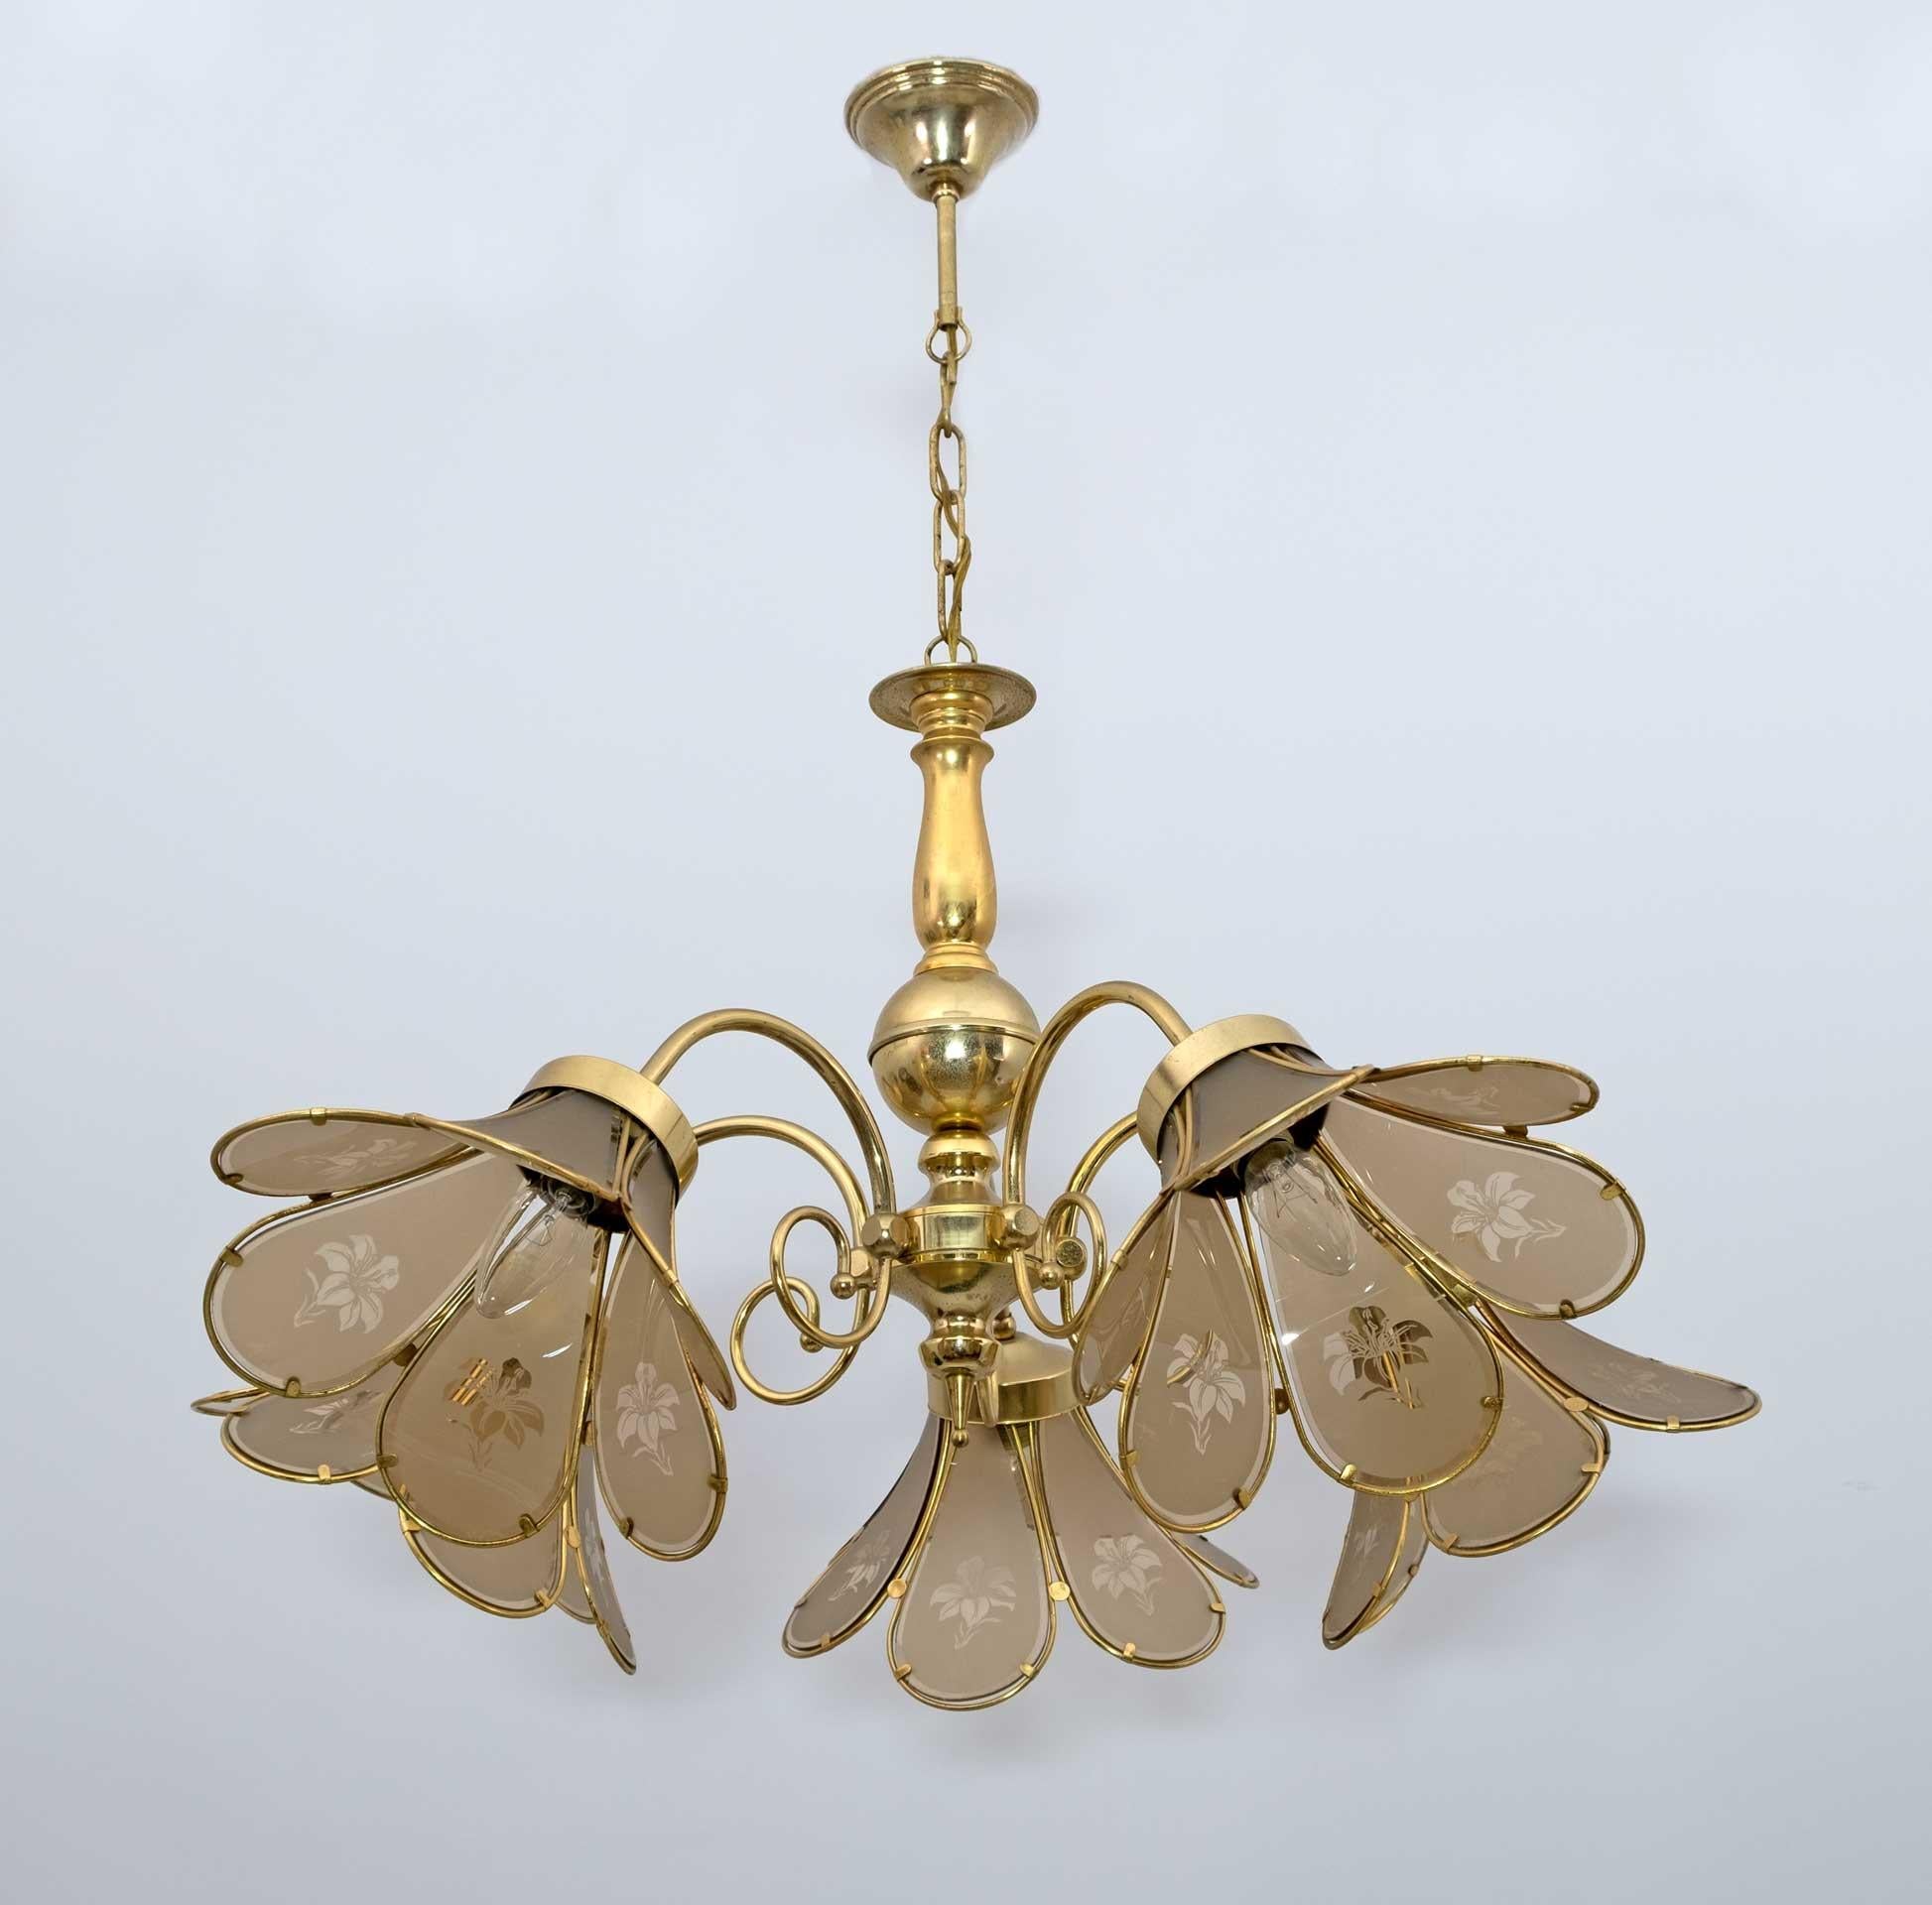 Elegant chandelier in brass and silk-screened glass, 5 lights, Italian production in the 60s.
E14 or E12 socket for USA.